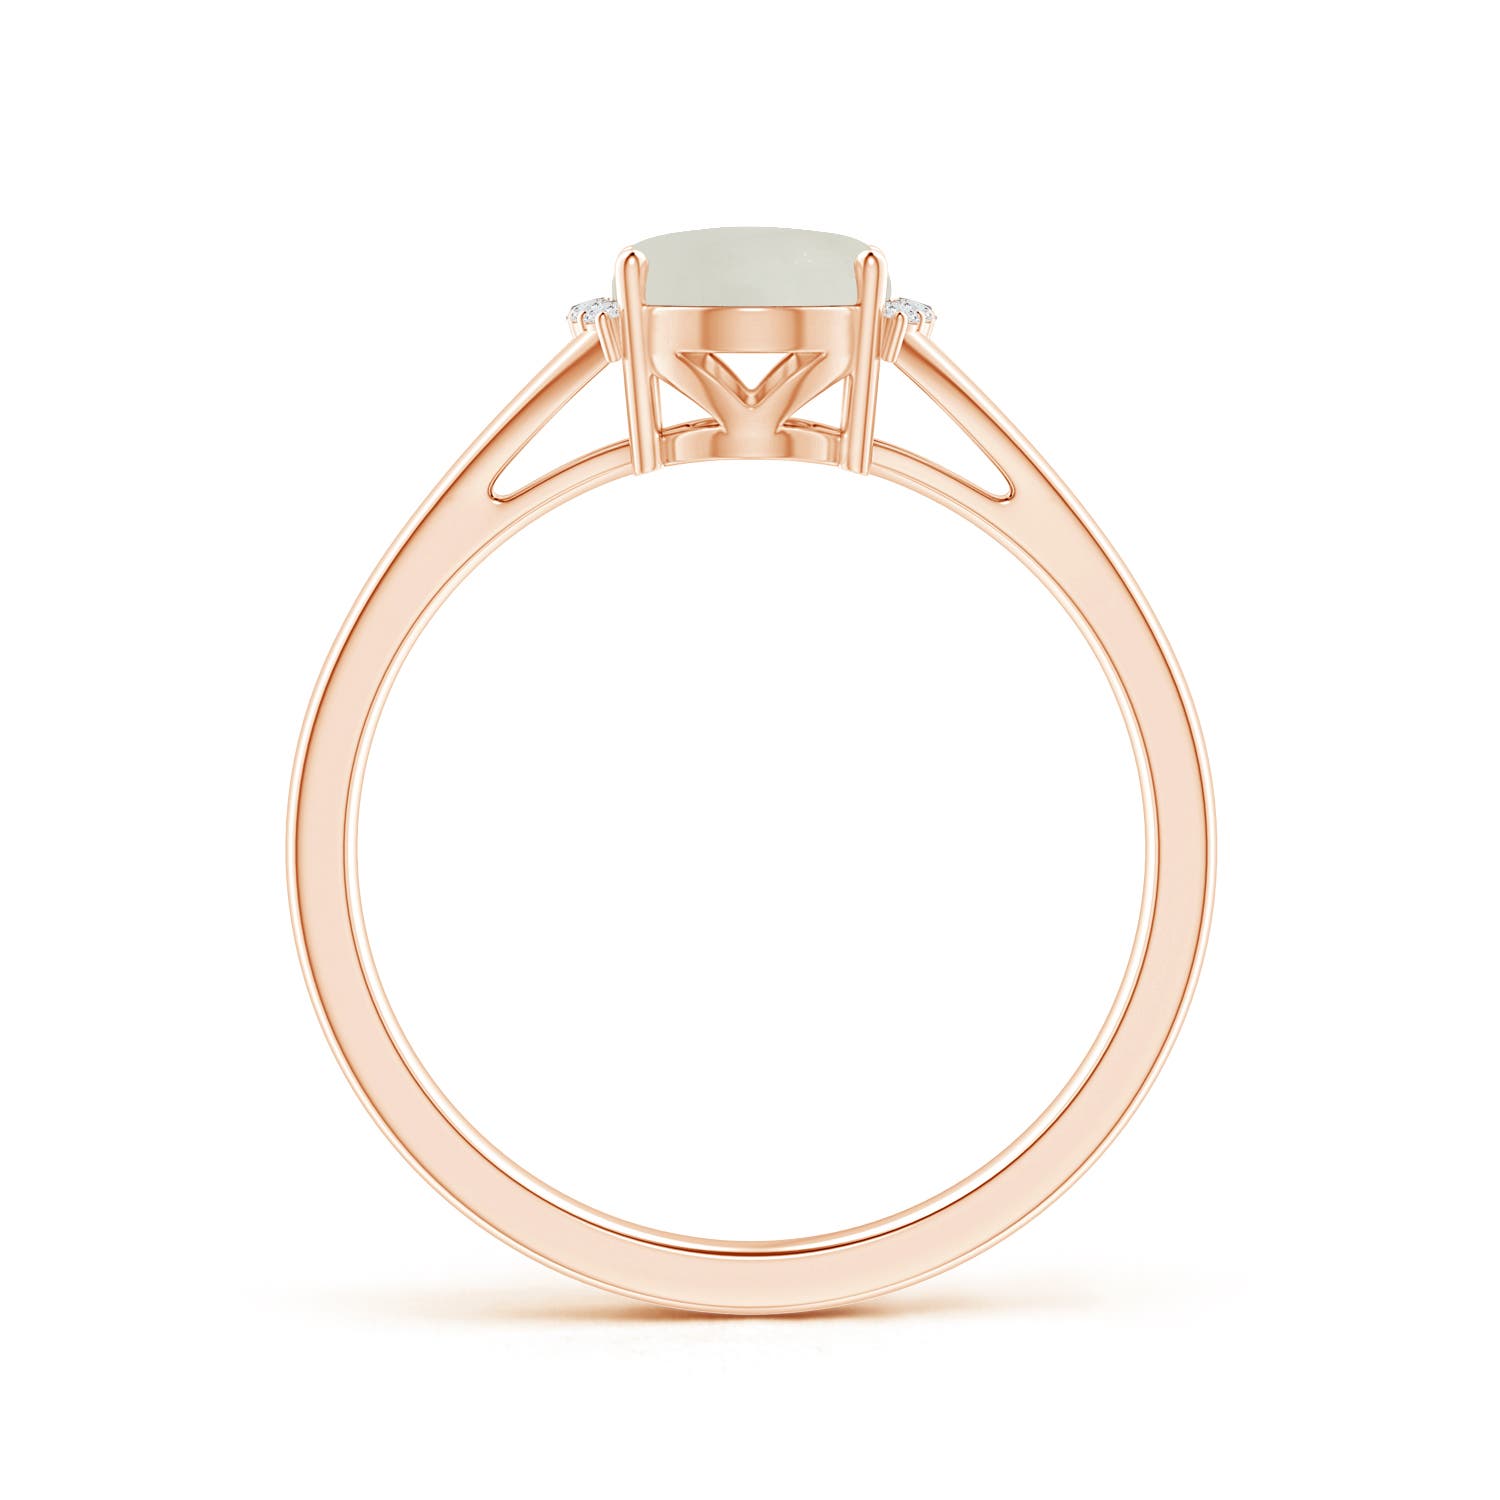 AAA - Moonstone / 1.15 CT / 14 KT Rose Gold